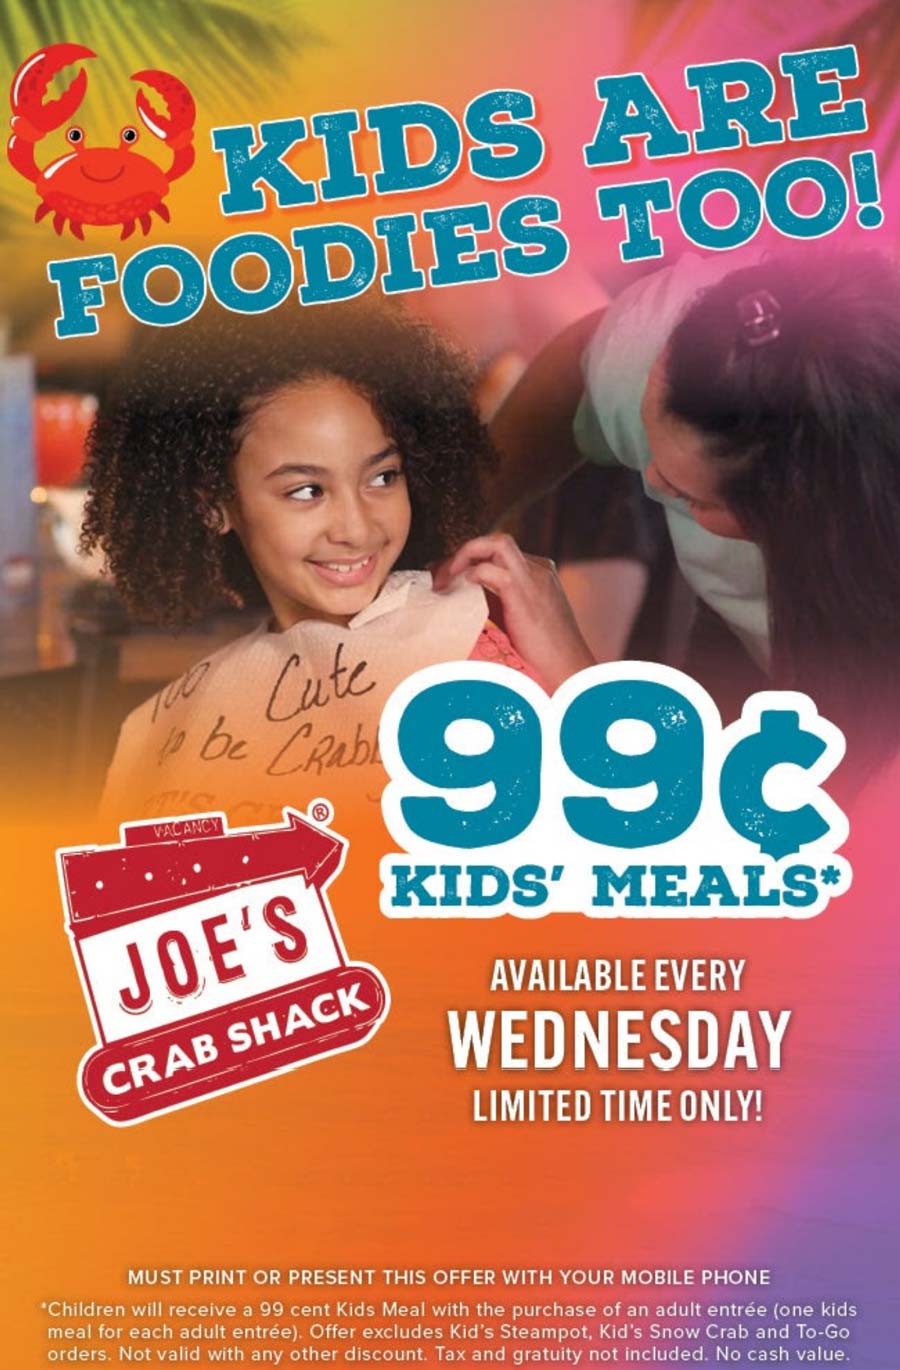 $1 kids meal with yours today at Joes Crab Shack #joescrabshack